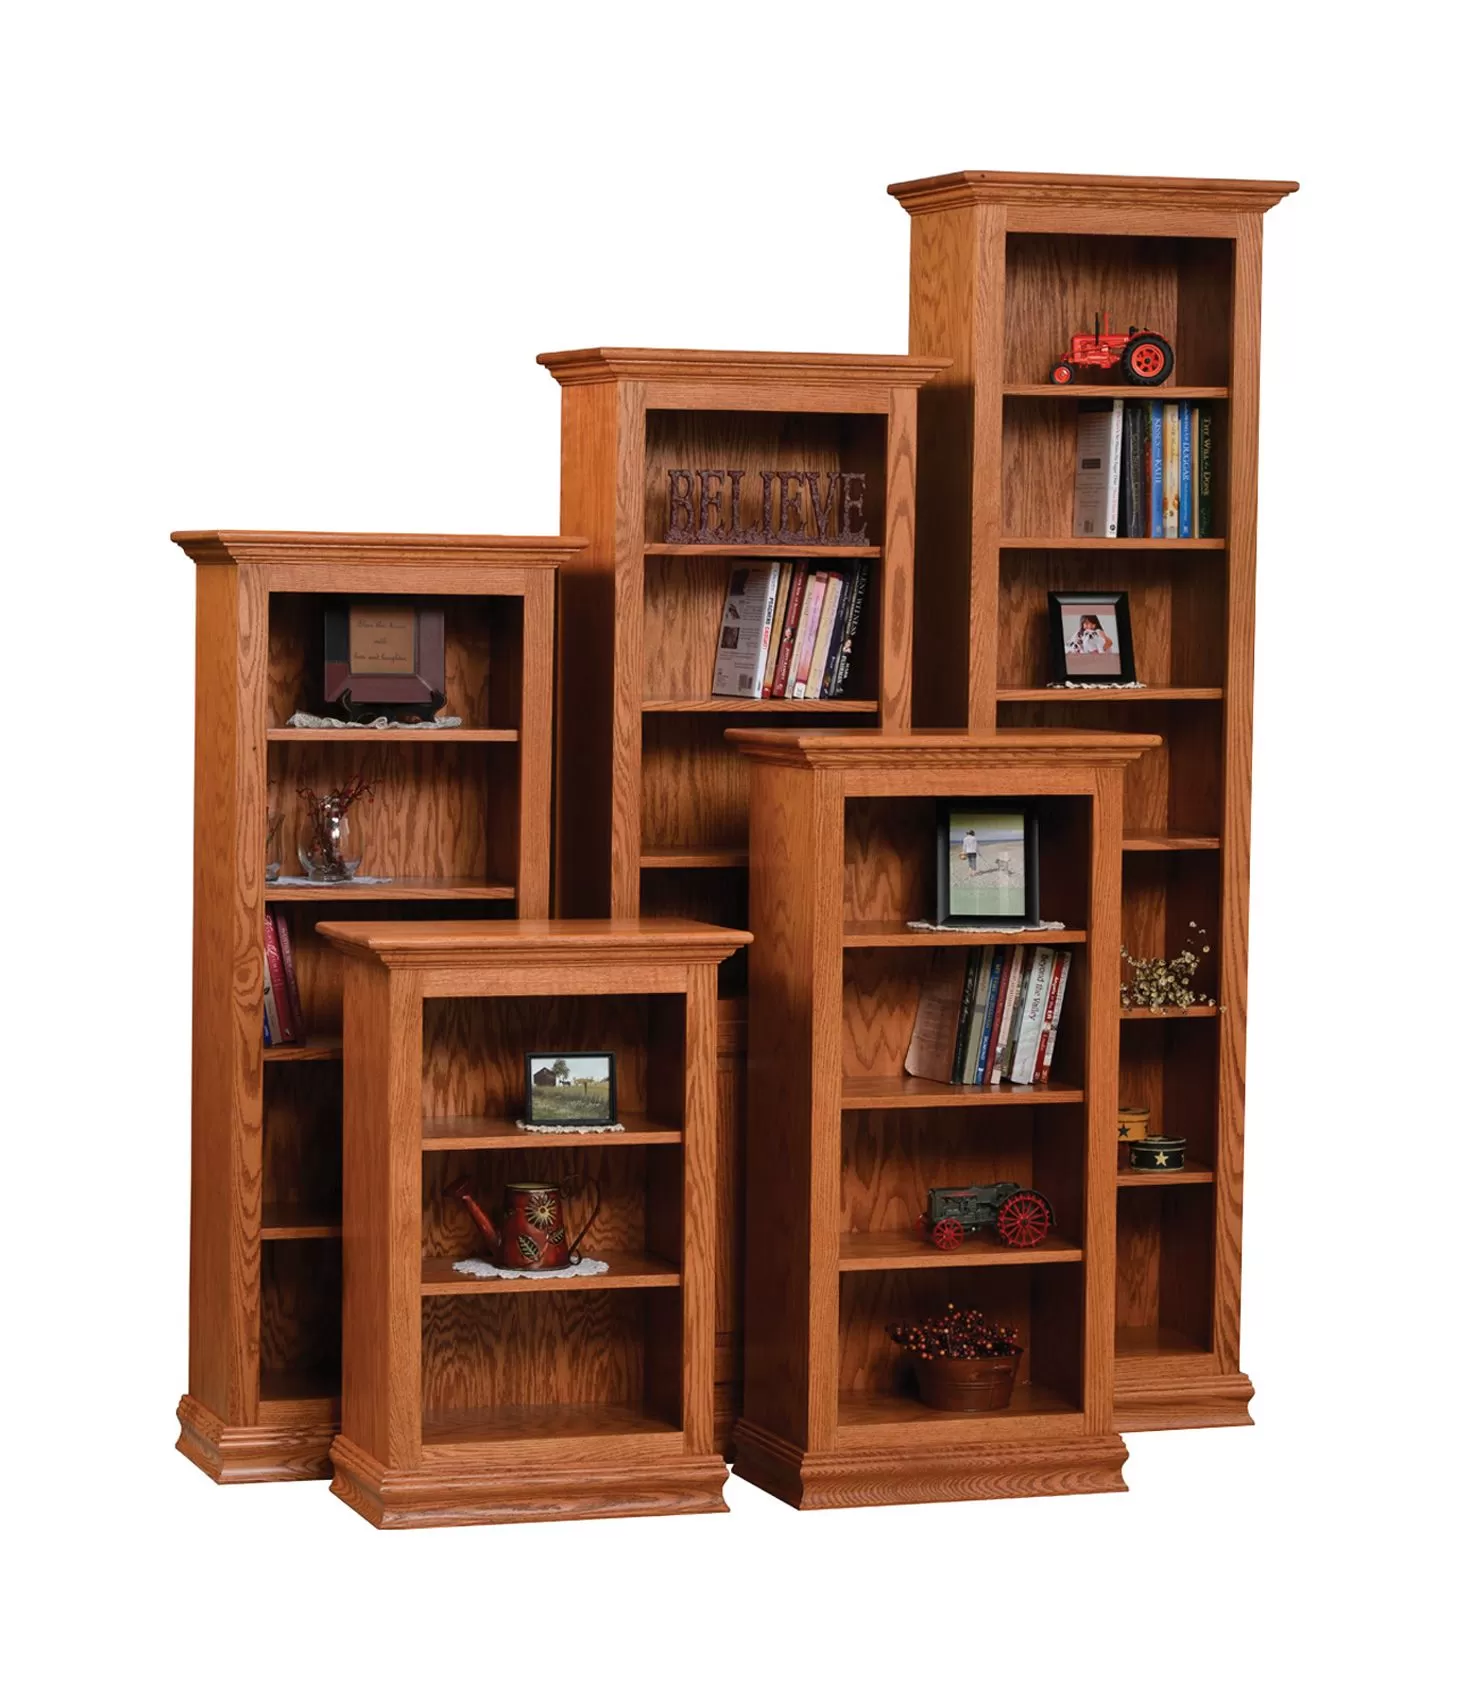 24" Traditional Open Bookcases